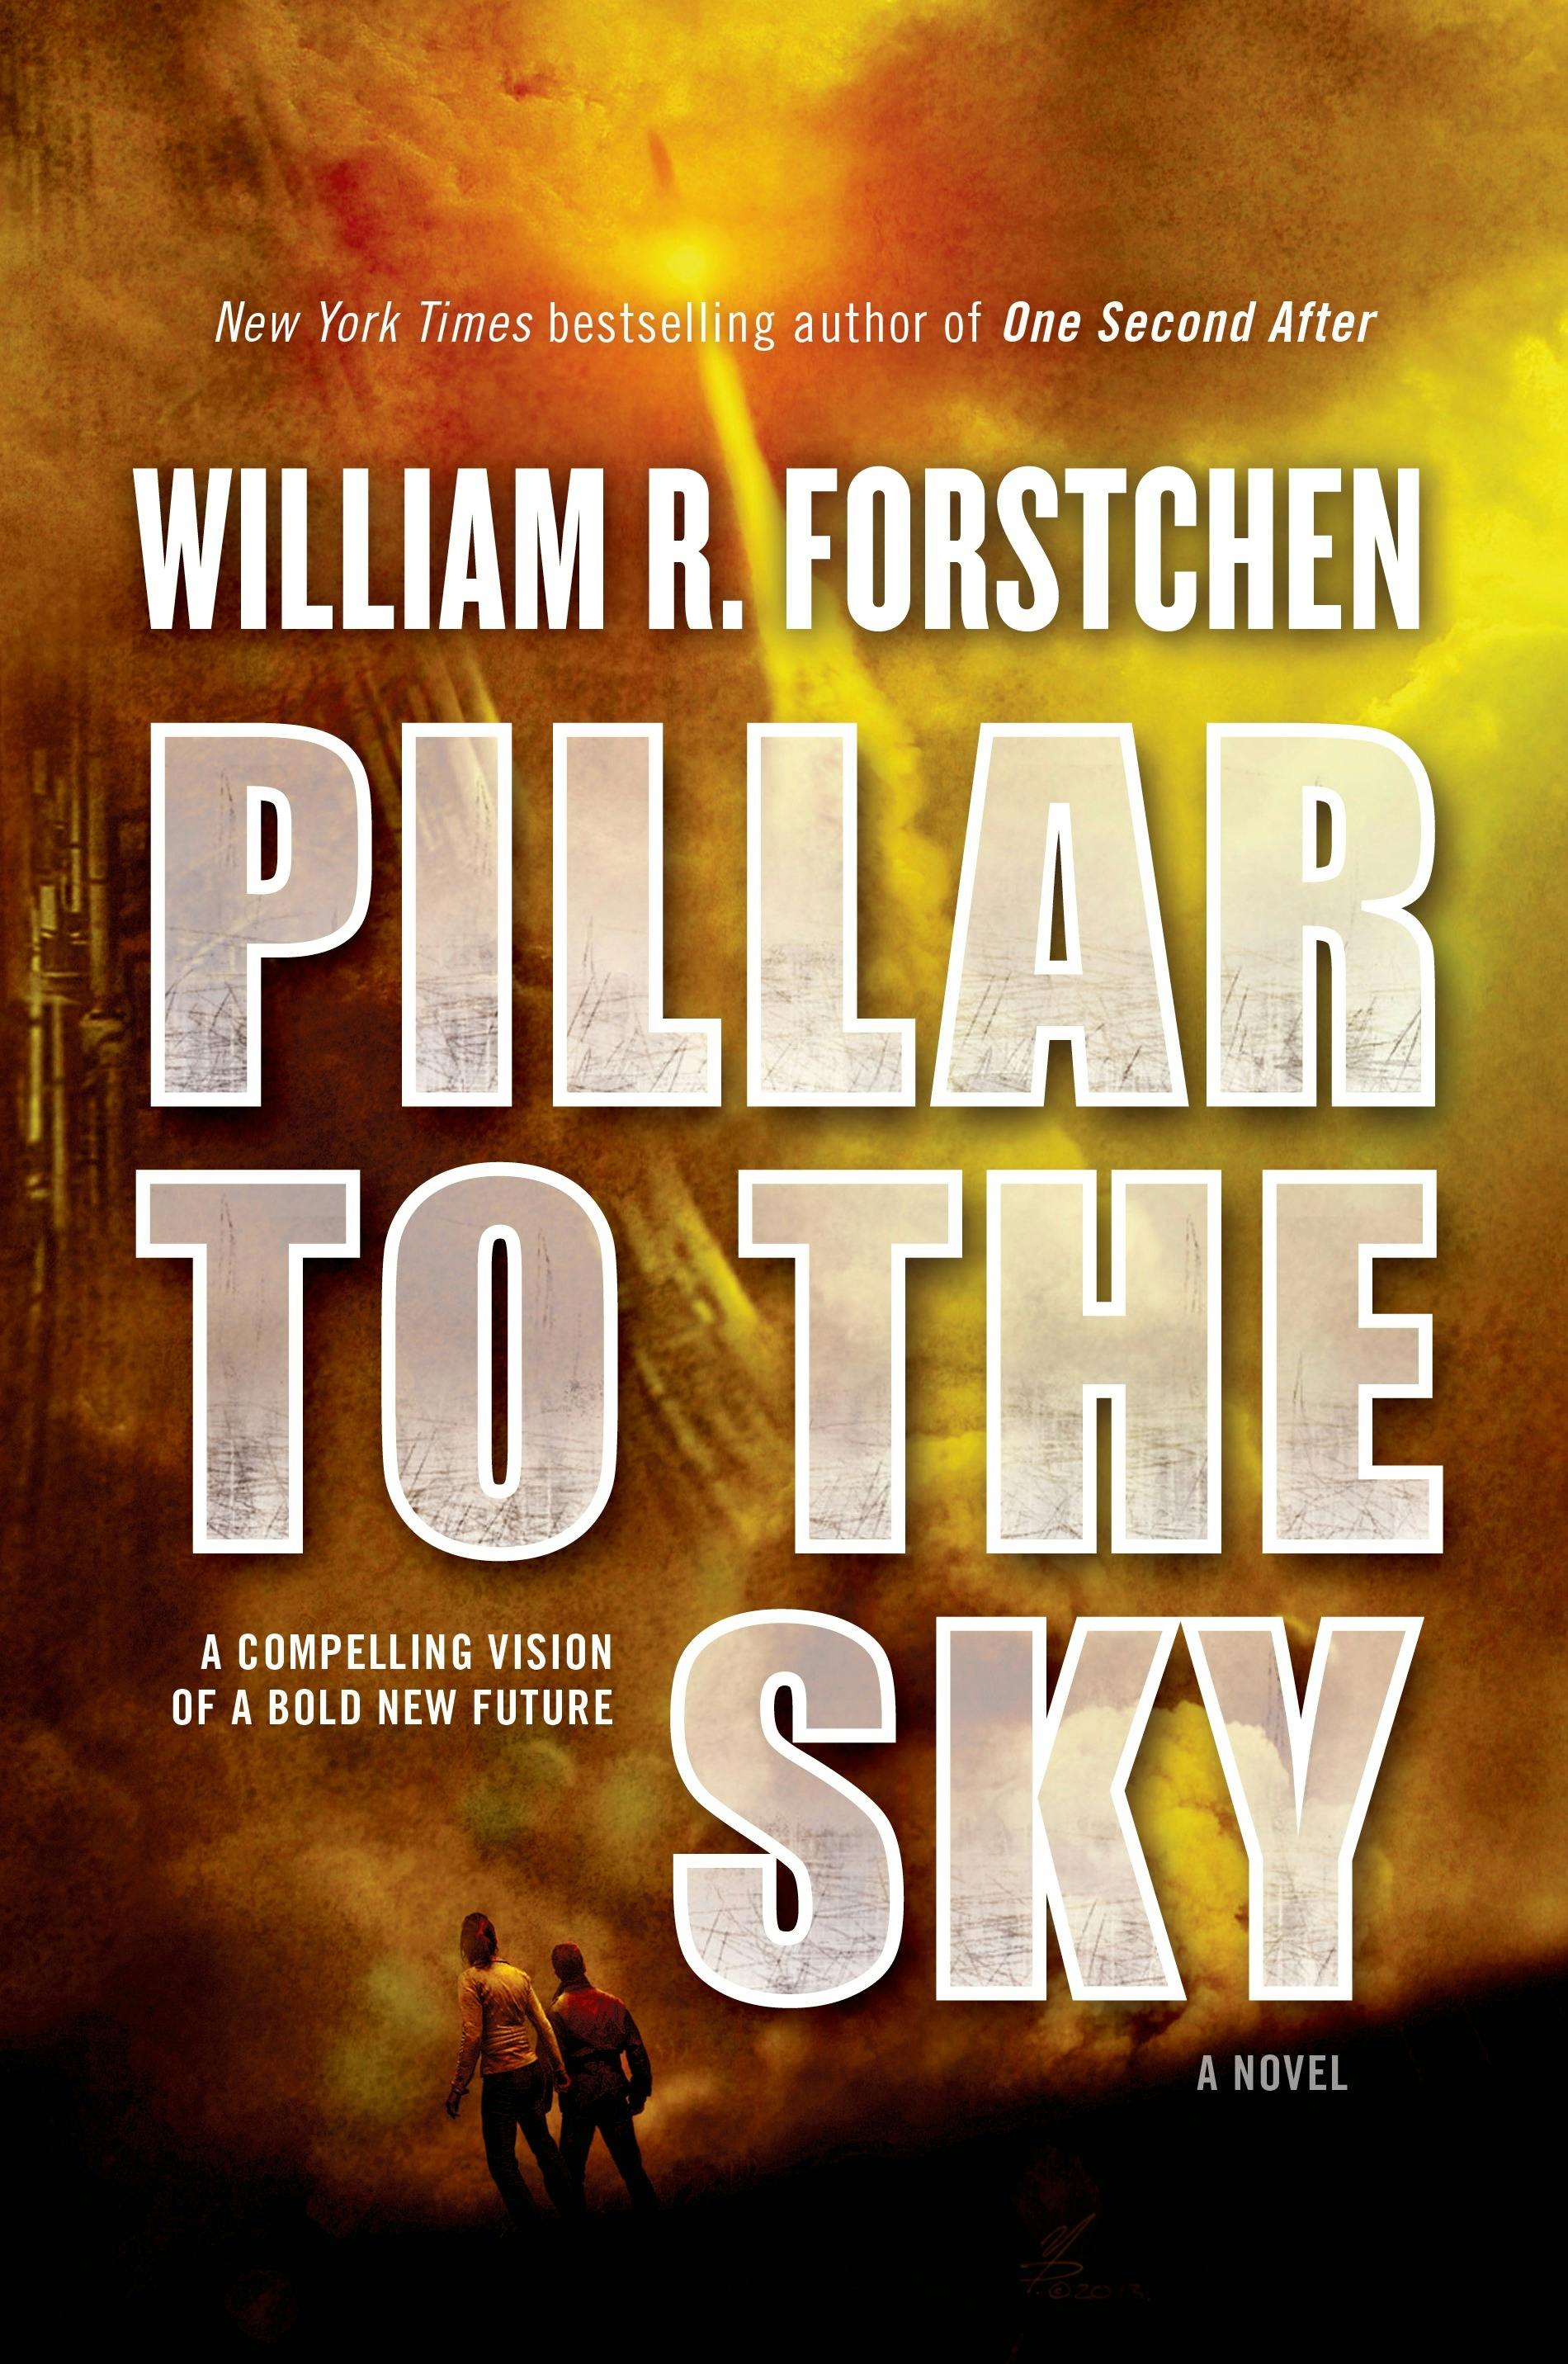 Cover for the book titled as: Pillar to the Sky